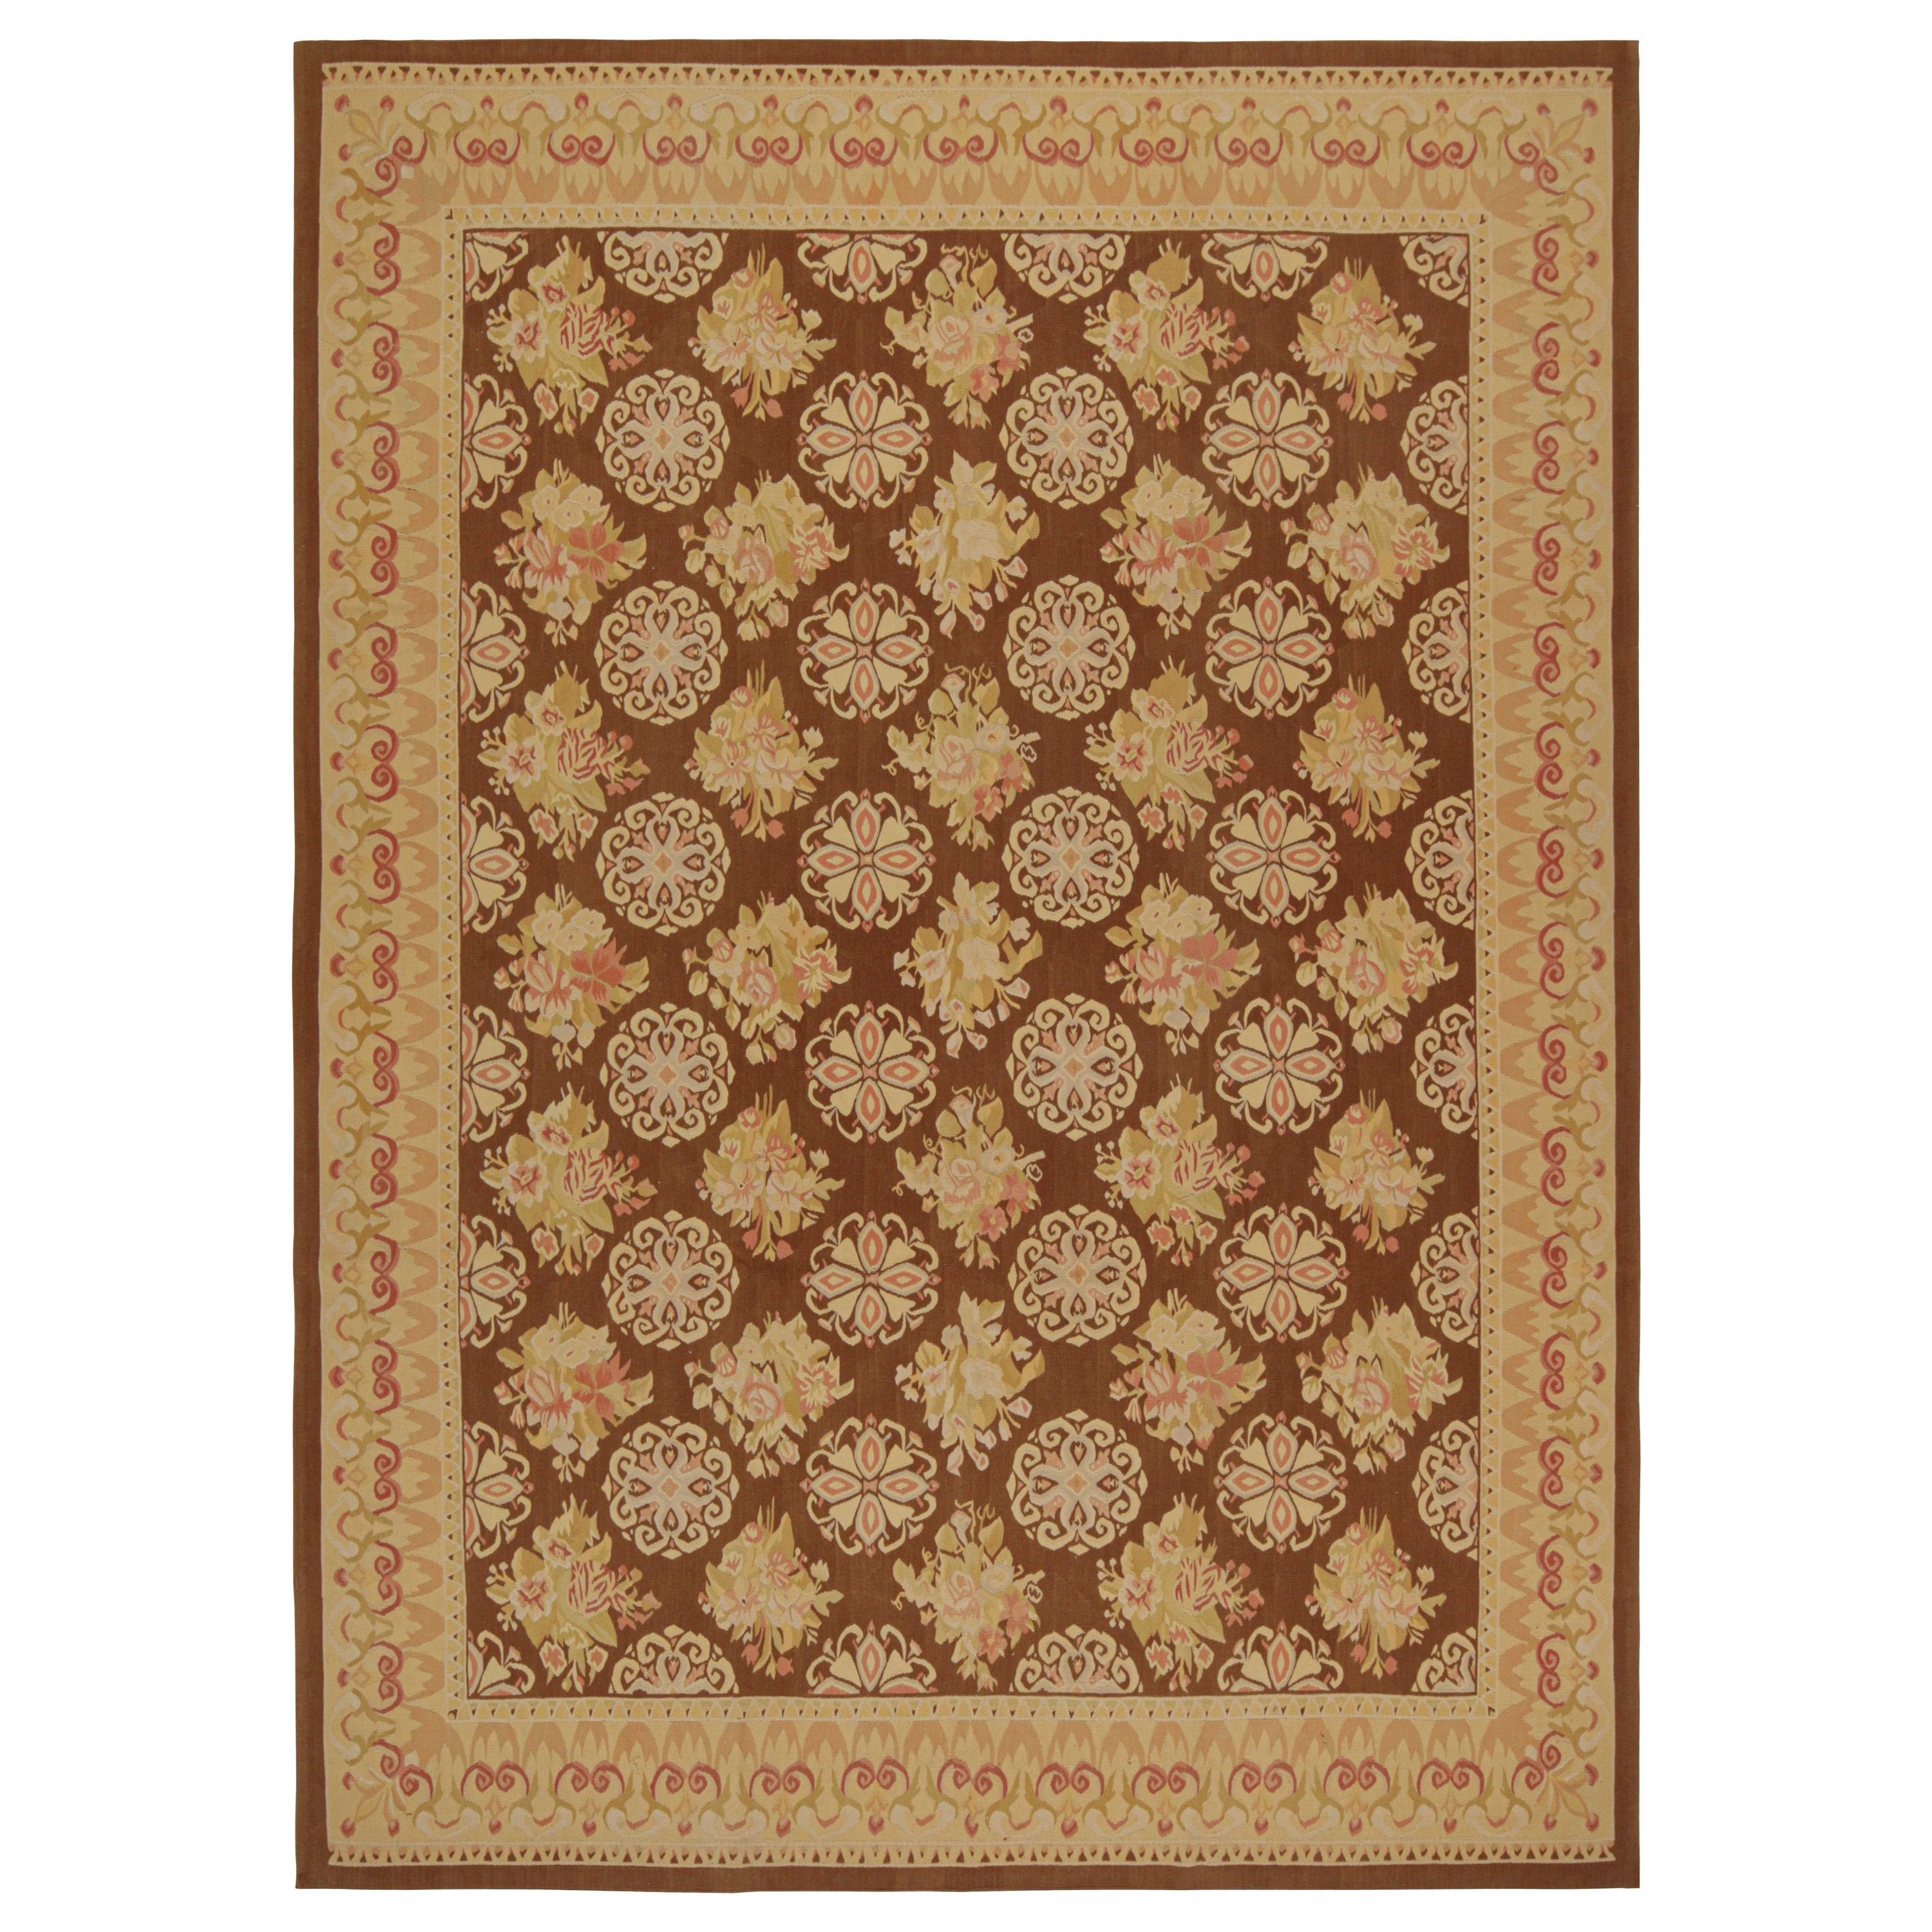 Rug & Kilim’s Aubusson Flatweave Style Rug in Brown with Beige Floral Patterns